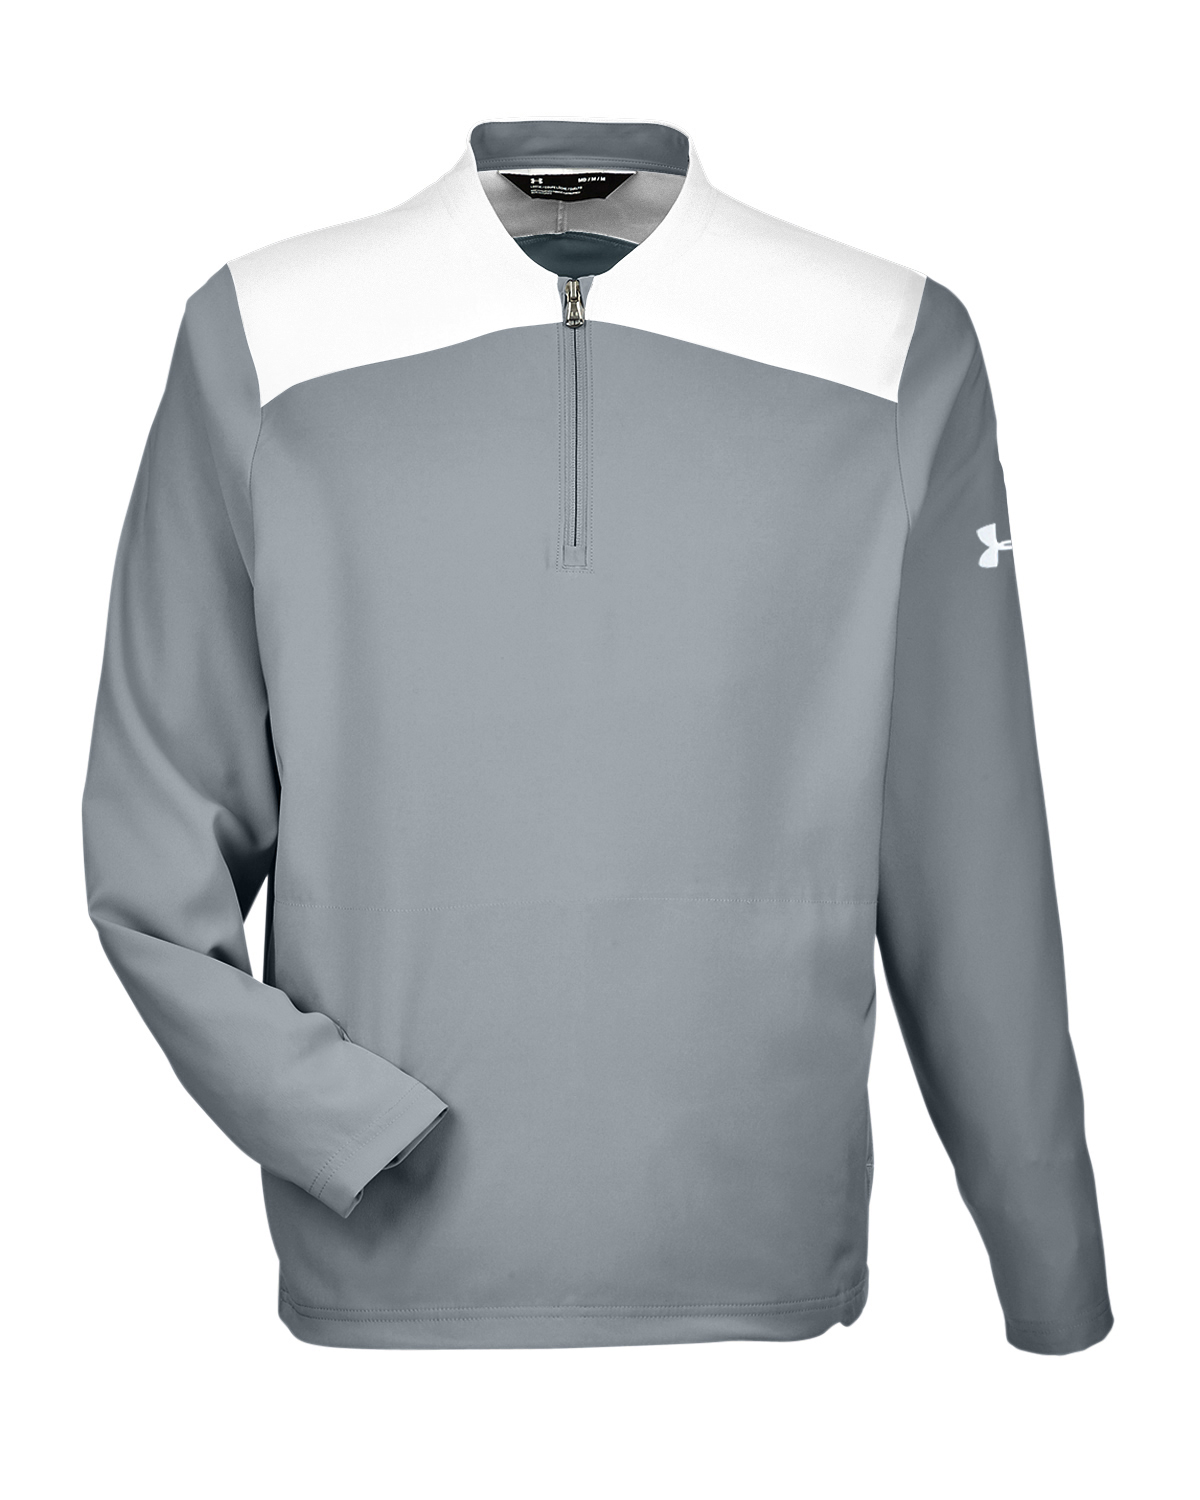 under armor pullovers